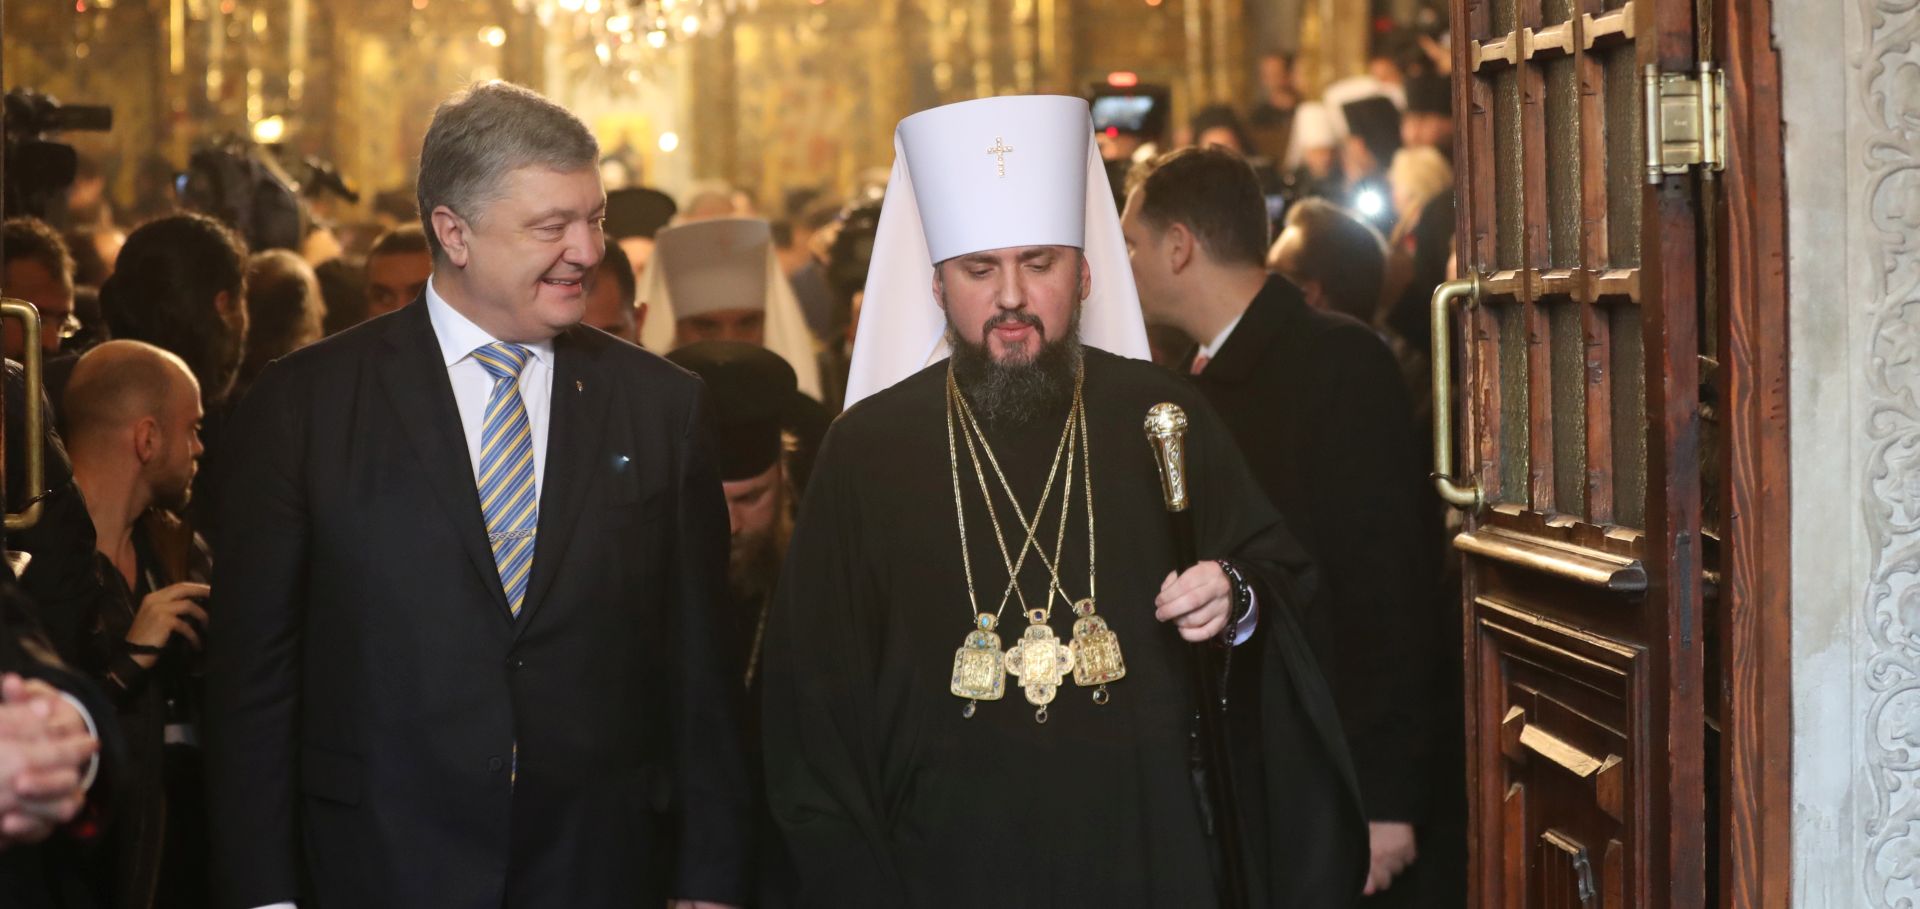 epa07263052 Ukrainian President Petro Poroshenko (L) and Bishop of the Ukrainian Orthodox Church of the Kyiv Patriarchate, Metropolitan of Pereiaslav and Bila Tserkva Epifaniy (Serhiy Dumenko) (R) leaves after attending the ceremony for receiving the Tomos of autocephaly from the Ecumenical Patriarch Bartholomew I (not pictured), a spiritual leader of the Orthodox Christian around the world, at St George Church in Istanbul, 05 January 2019. Bishop of the Ukrainian Orthodox Church of the Kyiv Patriarchate, Metropolitan of Pereiaslav and Bila Tserkva Epifaniy (Serhiy Dumenko) has been elected head of the local Orthodox Church in Ukraine at the unification council of the Ukrainian Orthodox churches on 15 December 2018. The Holy Synod announced its decision that the Ecumenical Patriarchate would proceed to grant autocephaly to the Church of Ukraine on 11 October 2018.  EPA/ERDEM SAHIN